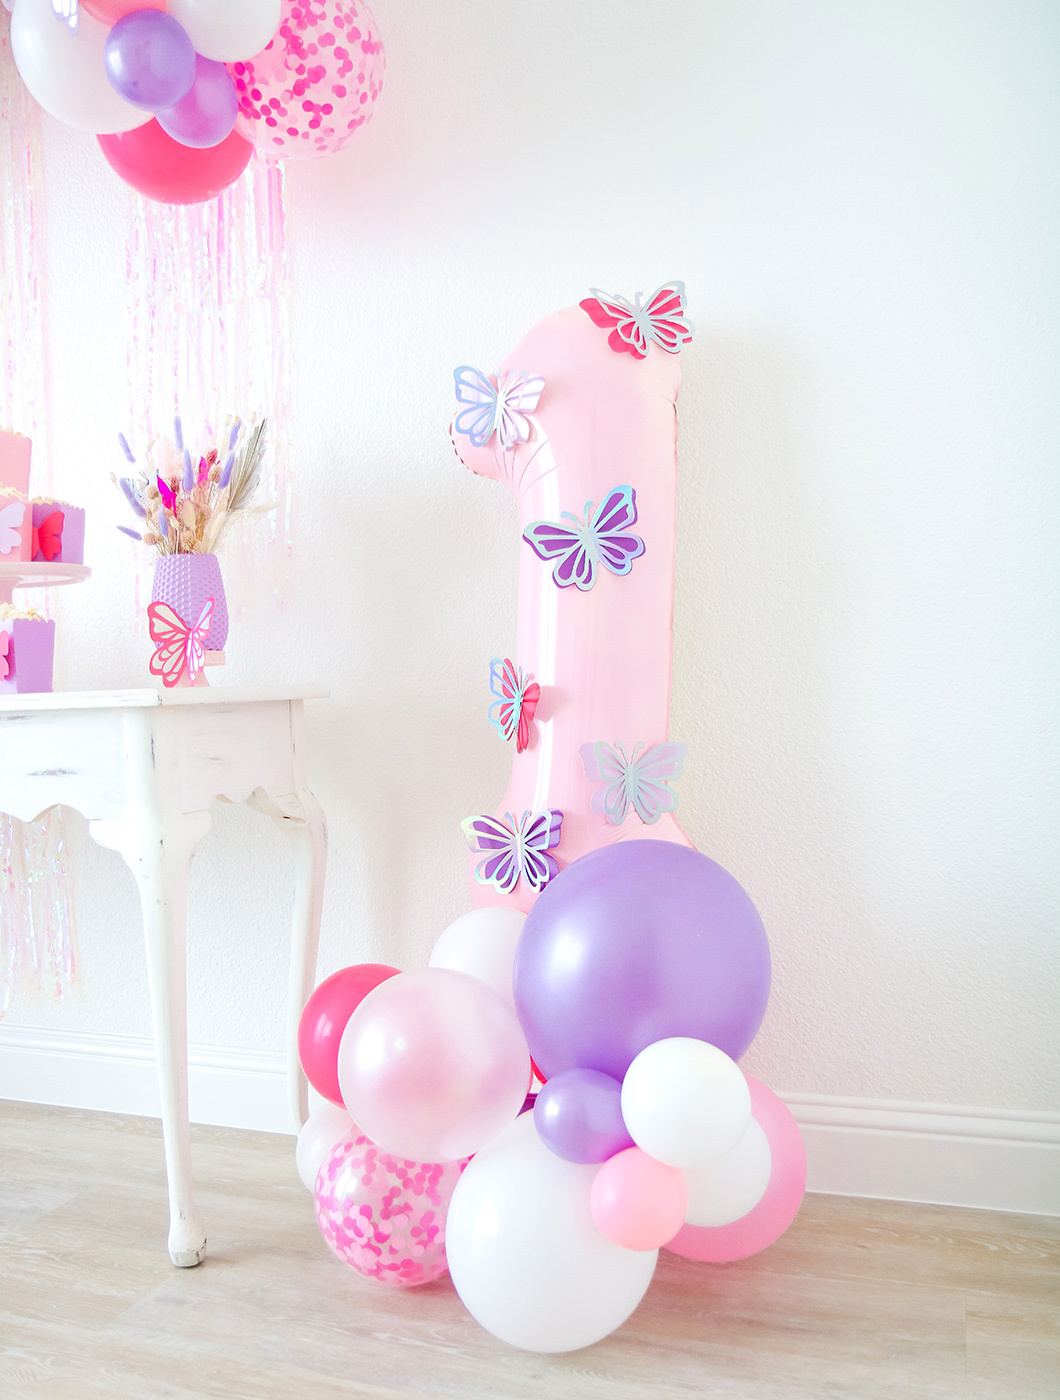 Butterfly Themed 1st Birthday Party